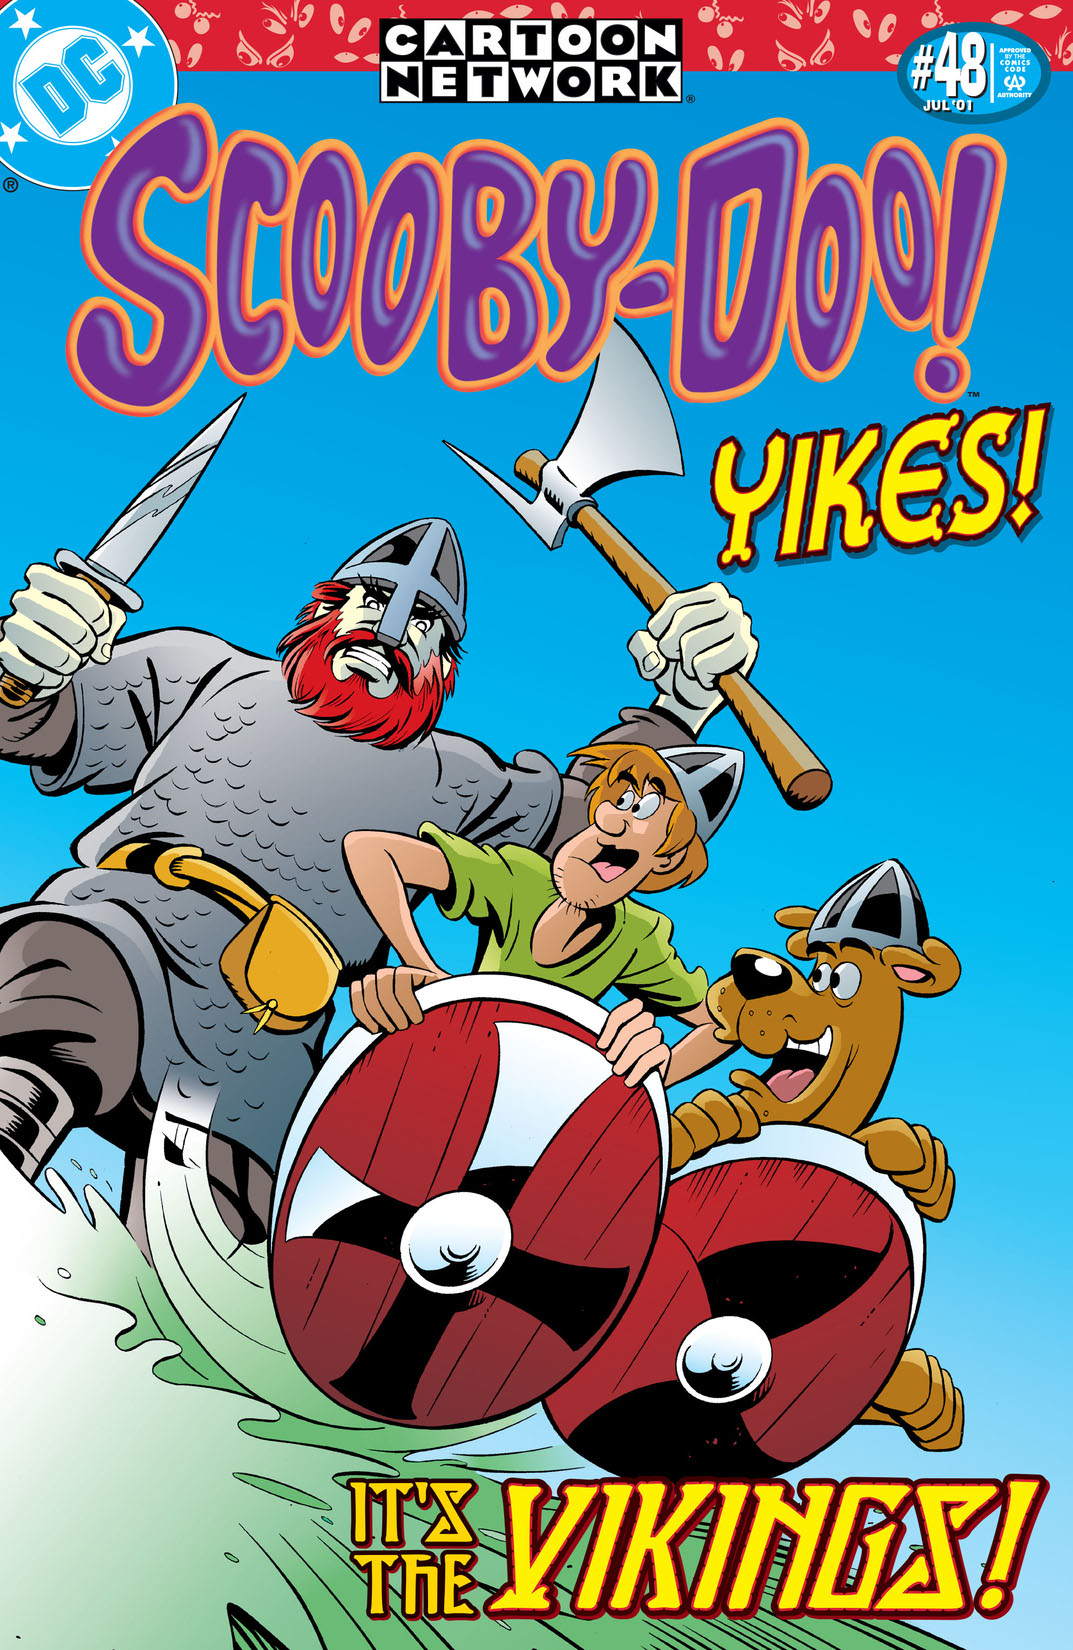 Scooby-Doo #48 preview images